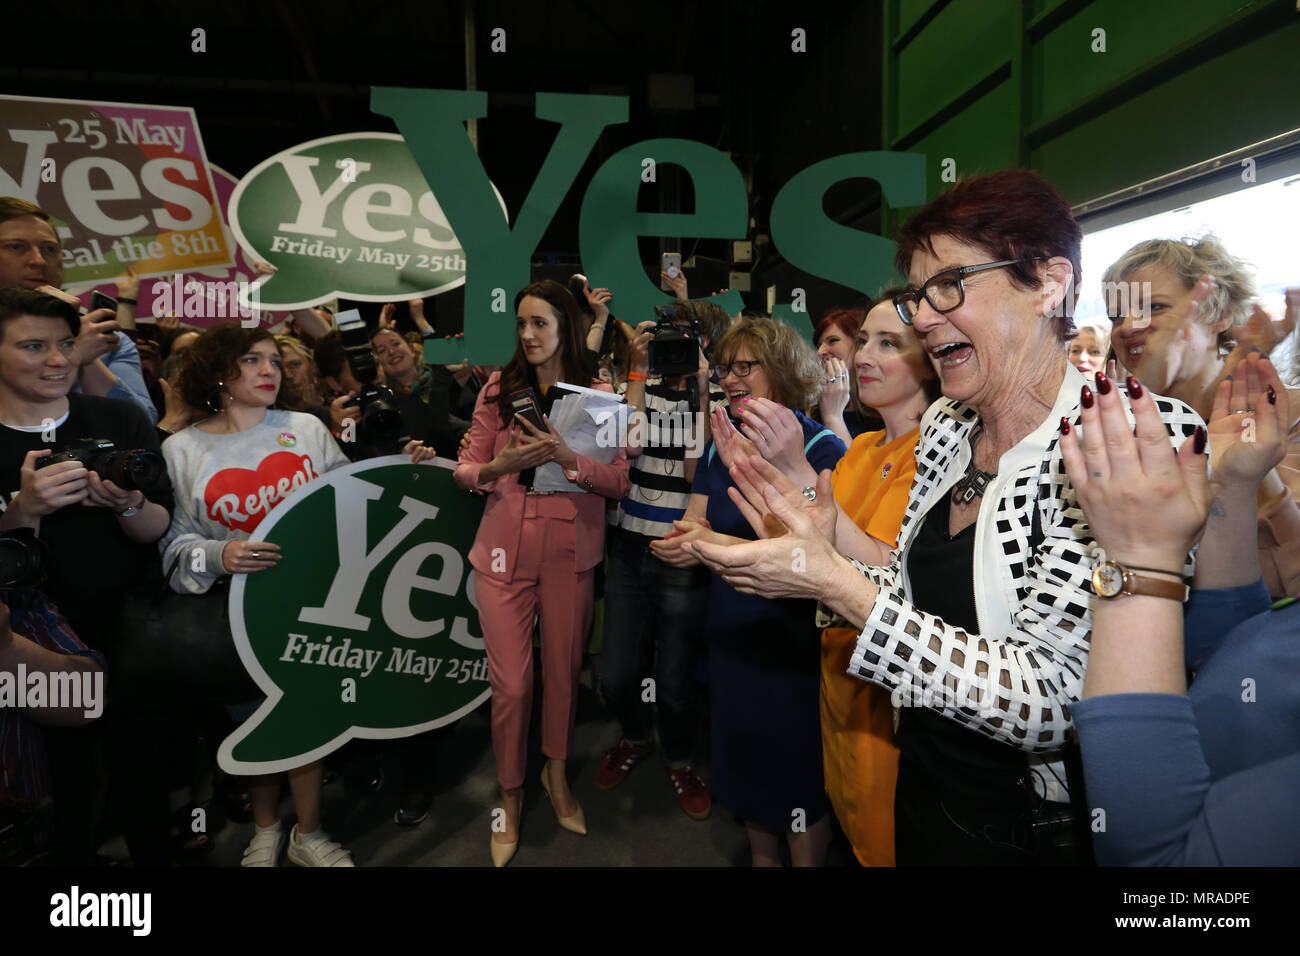 Dublin, Ireland, 26 May 2018.  Count Center - RDS. Pictured Feminist and Pro Choice campaigner who co-founded the Coalition to Repeal the Eighth Amendment in 2013, Ailbhe Smyth speaking to the media as they arrive at the Dublin Count Center, from the Referendum of the 36th Amendment to the Constitution Bill 2018 in the RDS. Photo: Sam Boal/RollingNews.ie &#38;&#35;13; Stock Photo